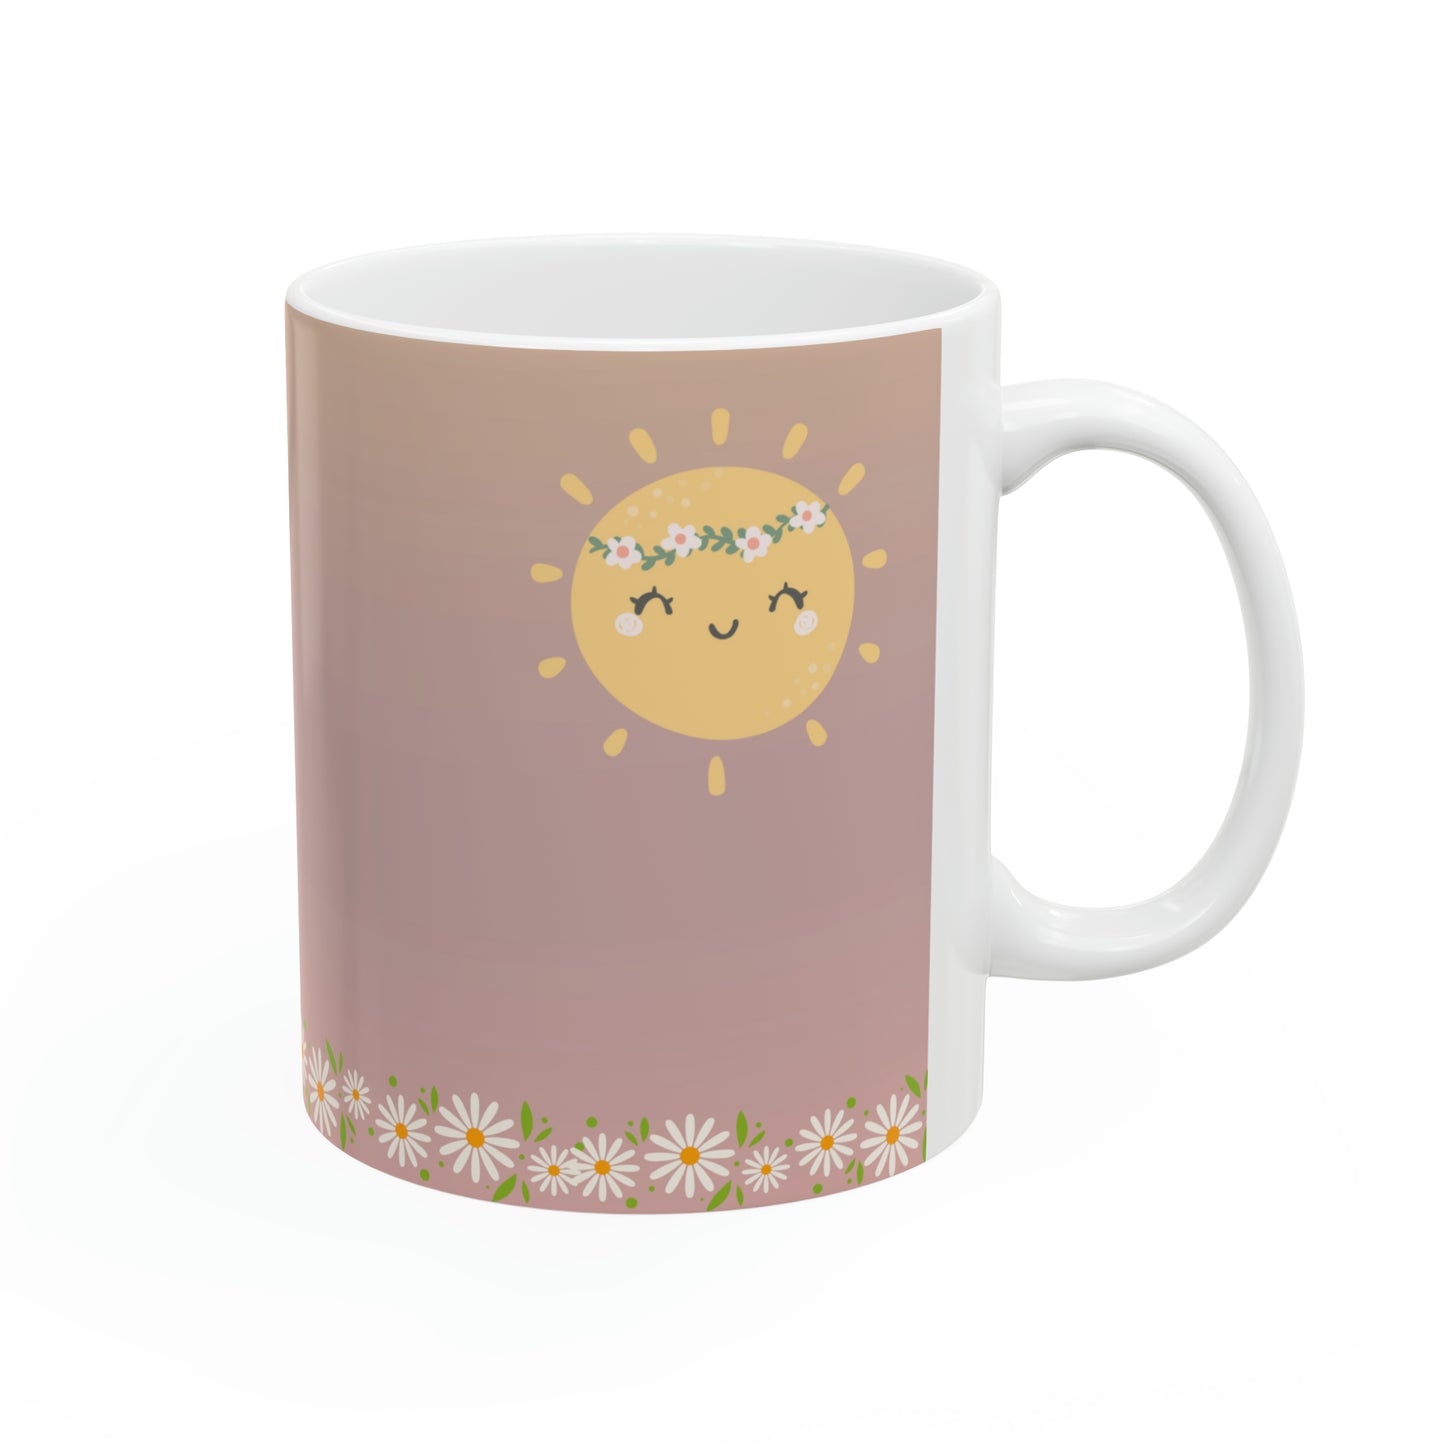 Self Care Is Hard But You Are Worth It - Spring Mug